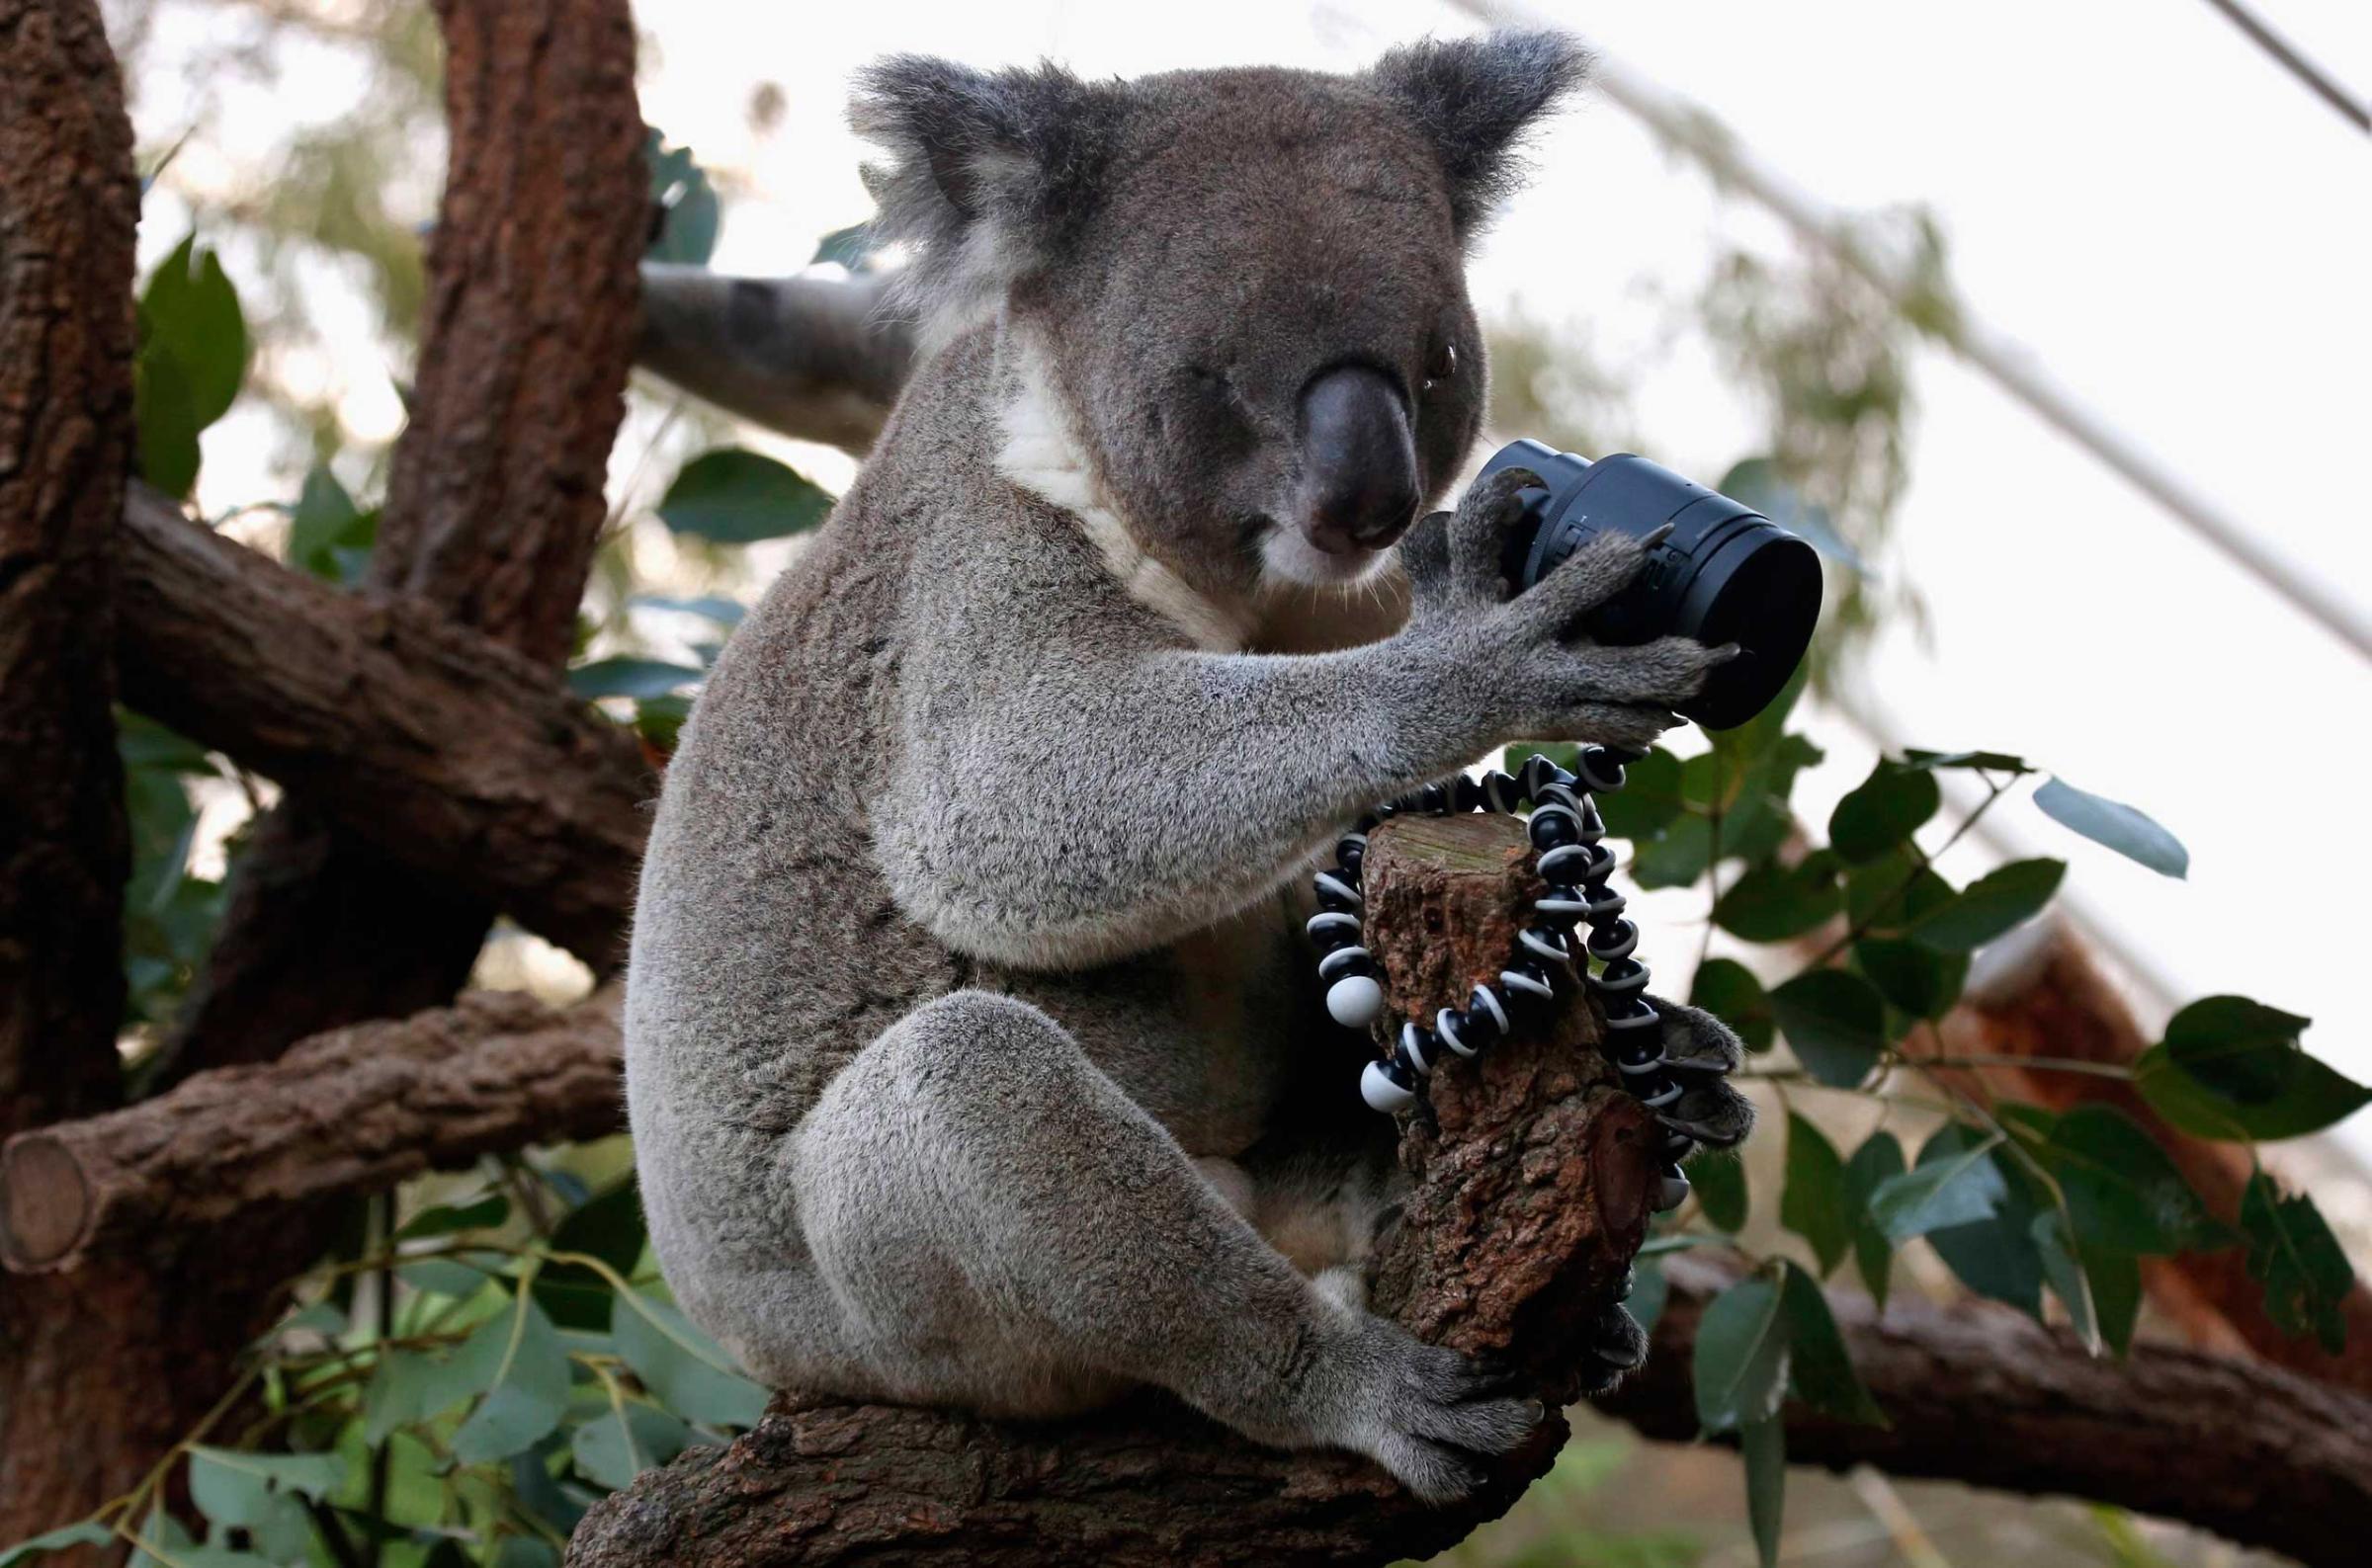 An Australian Koala, born with a damaged eye, sits atop a branch in its enclosure at Sydney Zoo, Sydney, April 3, 2014.